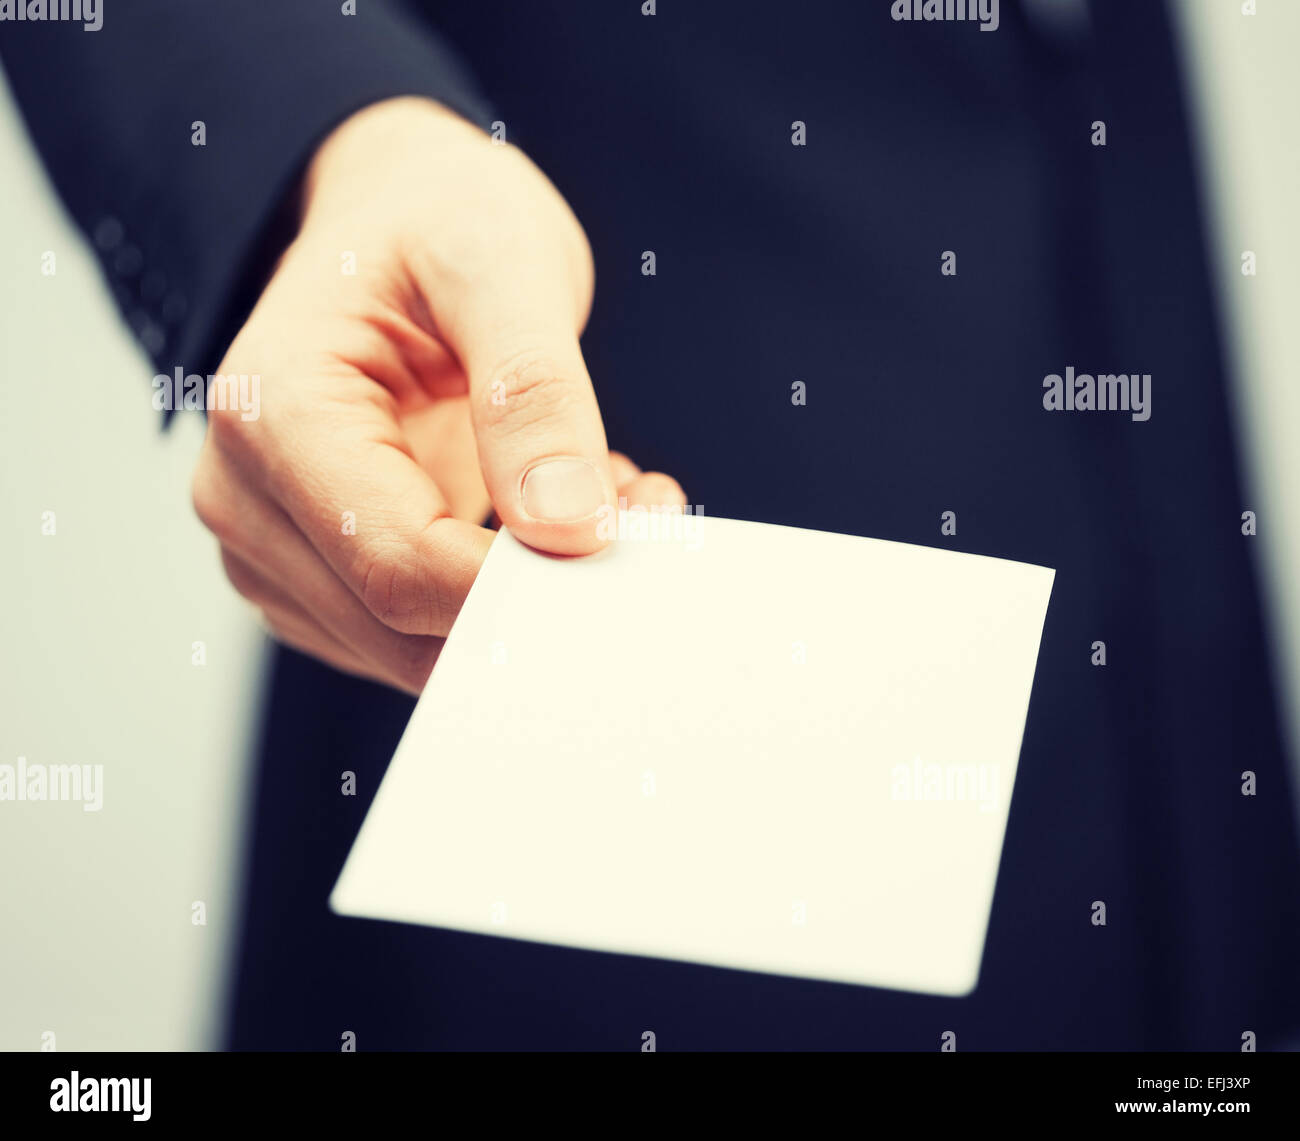 man in suit holding credit card Stock Photo